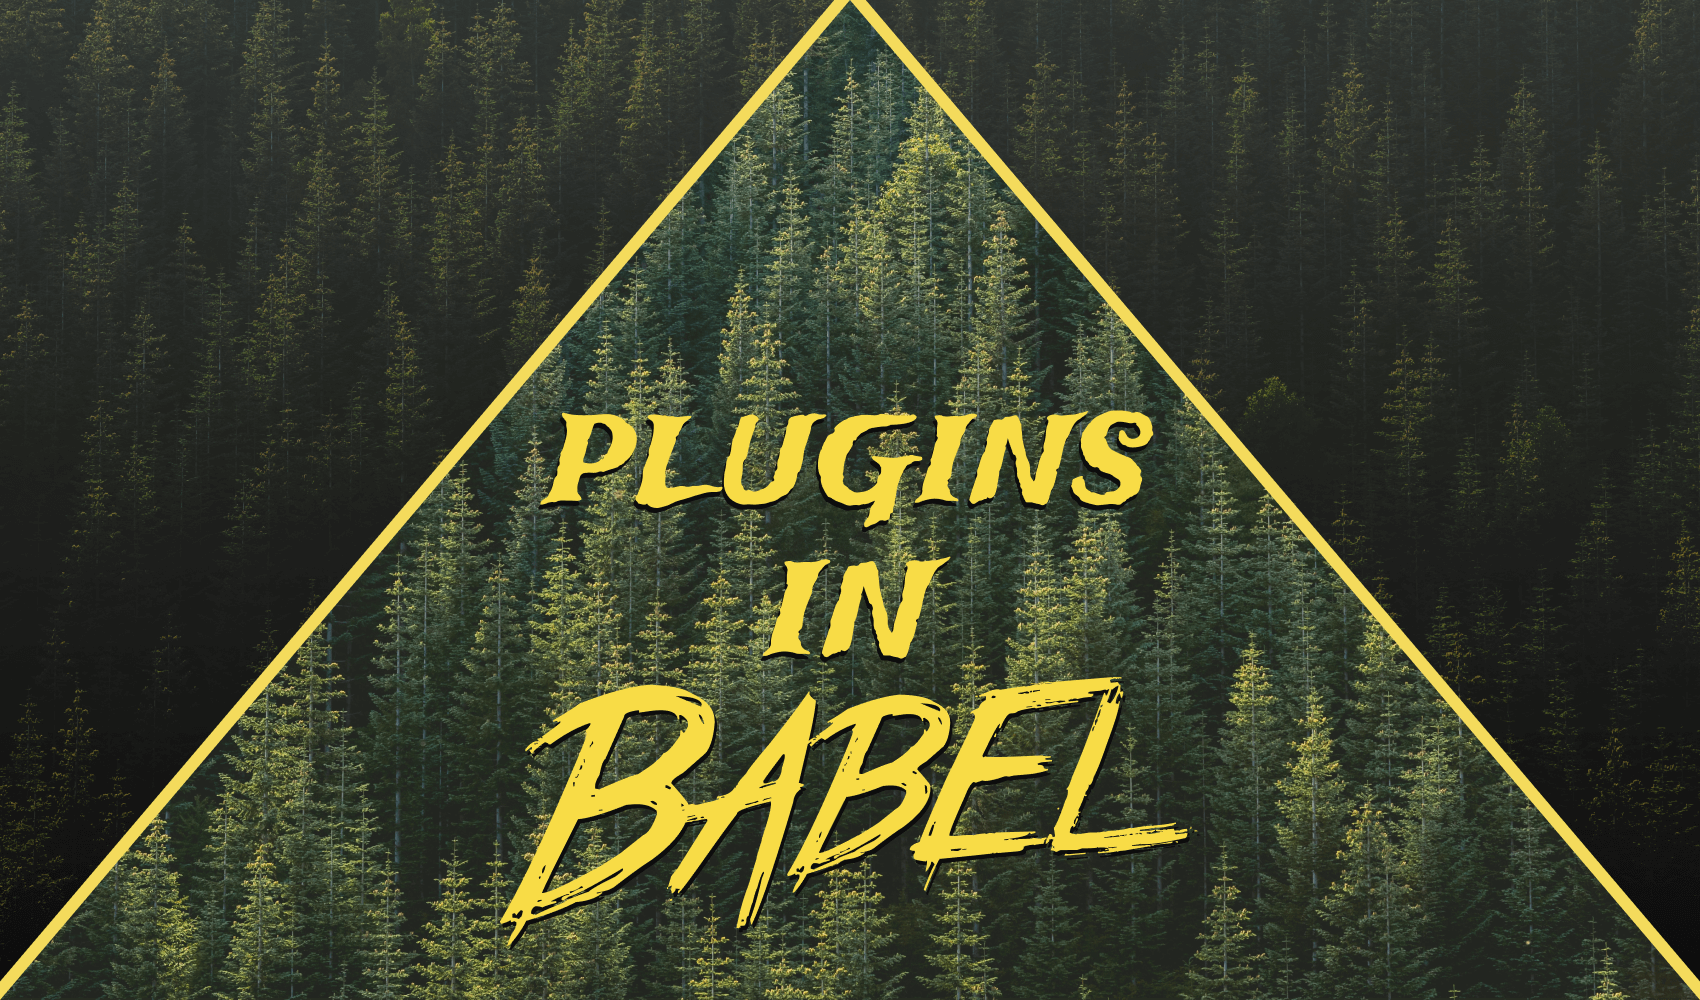 How to Add Extra Functionality to Your Modules With Babel